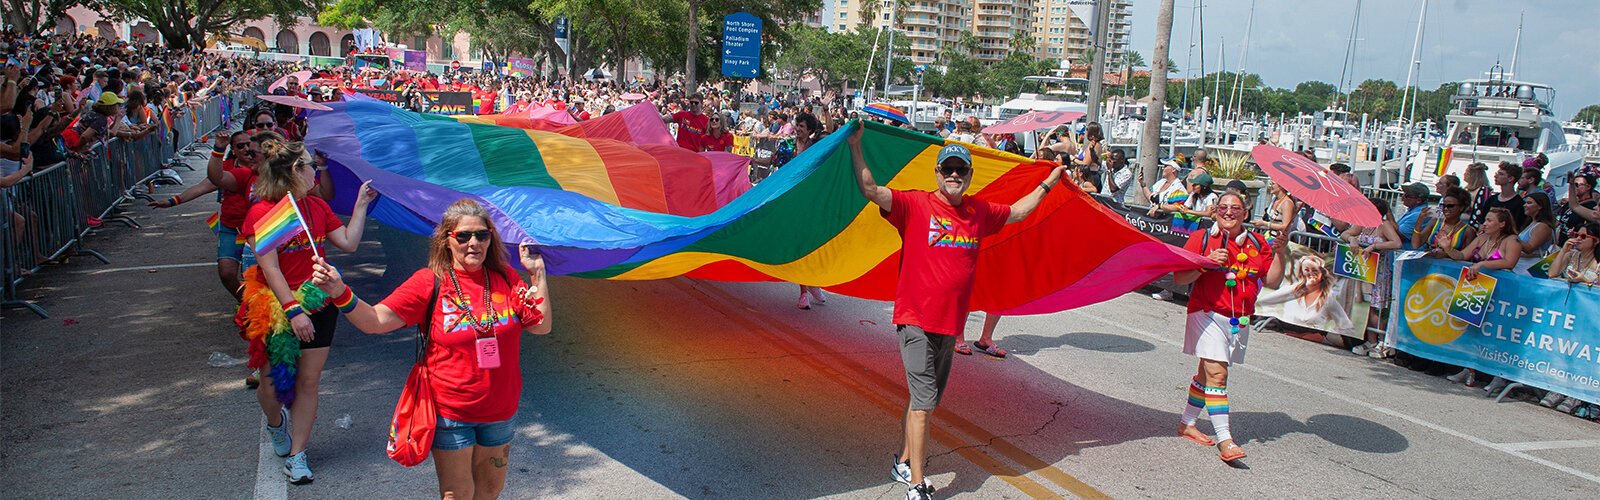 The largest Pride Flag at this years St Pete Pride Parade is carried along the route.